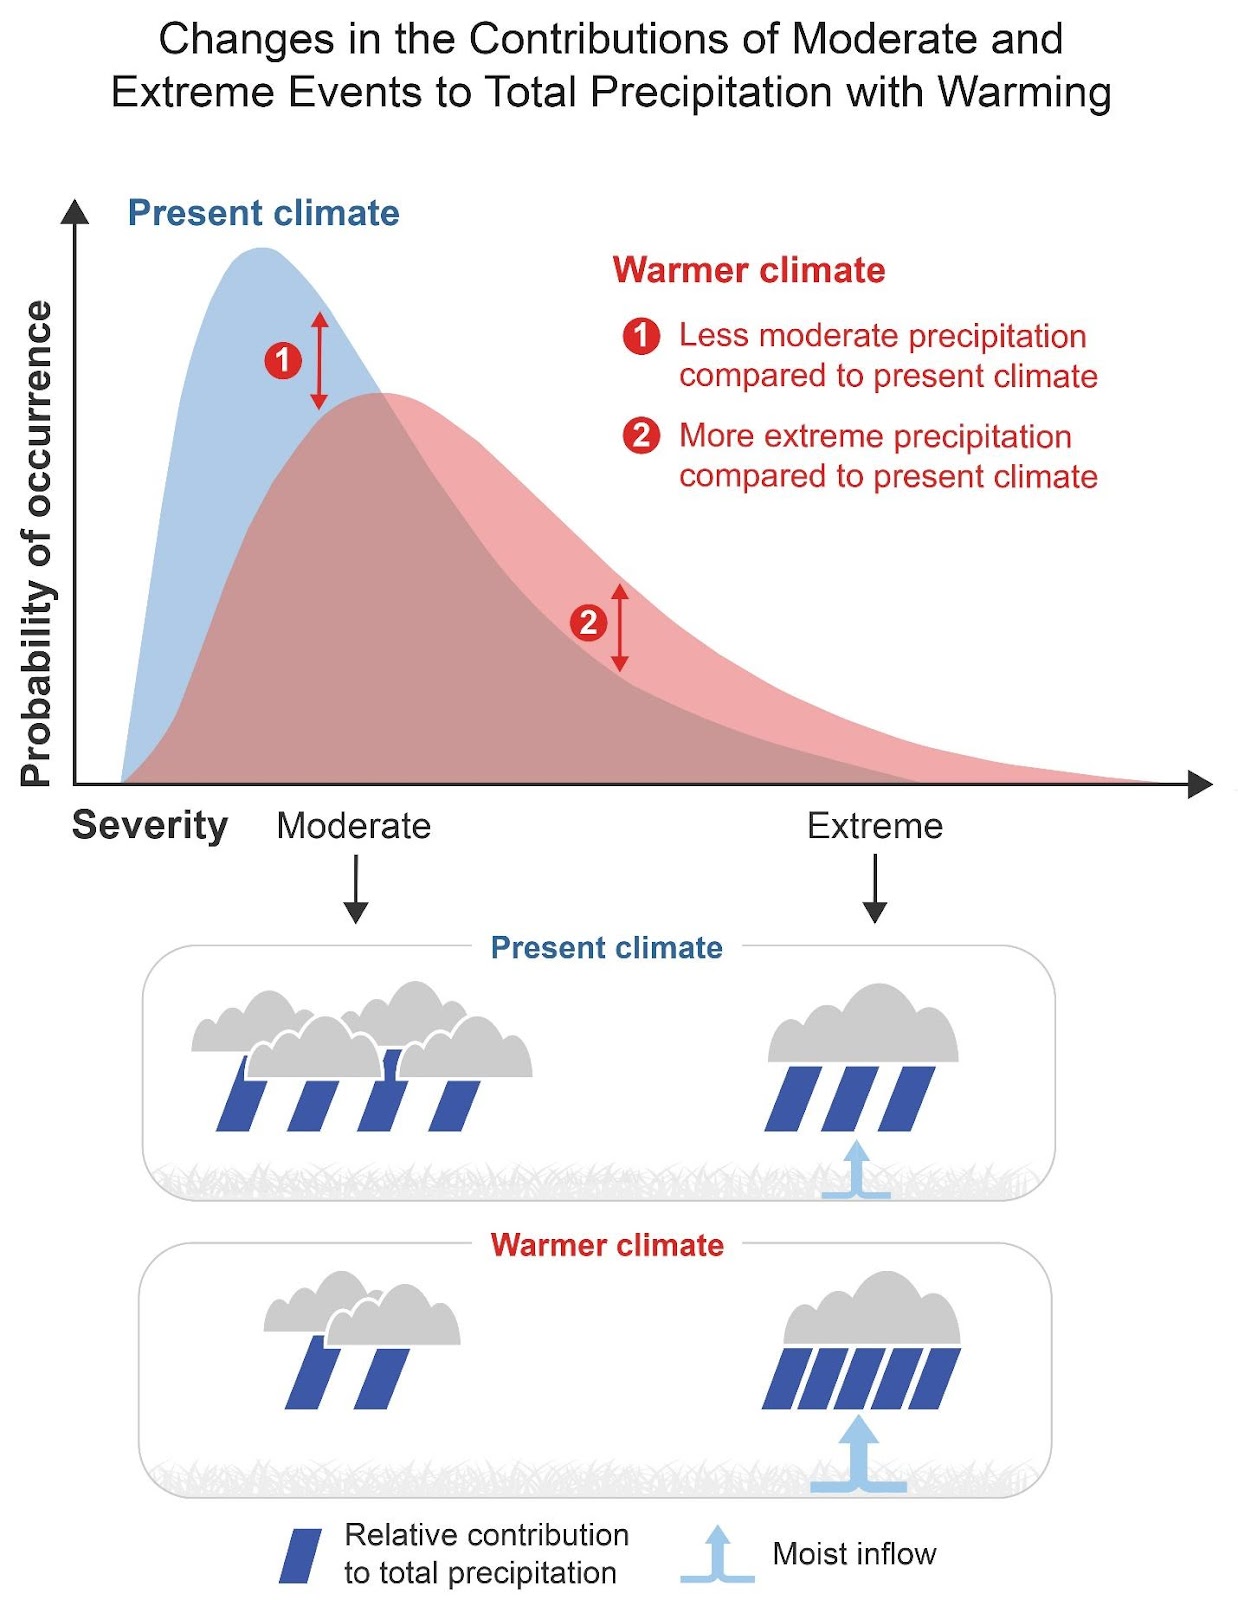 Changes in the Contributions of Moderate and Extreme Events to Total Precipitation with Warming